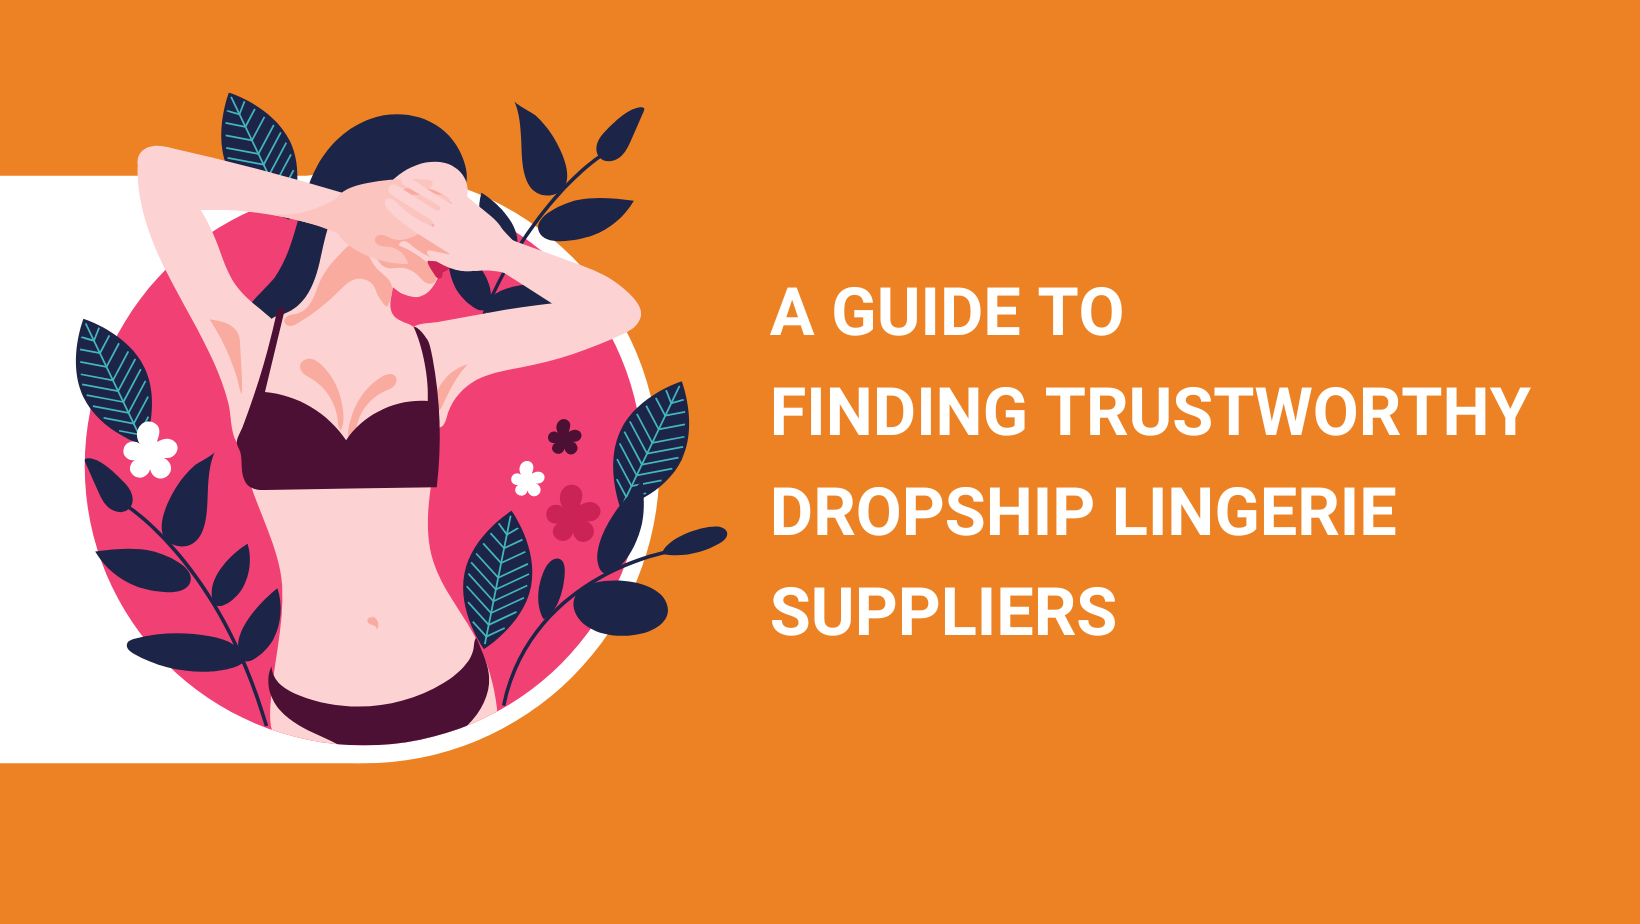 A GUIDE TO FINDING TRUSTWORTHY DROPSHIP LINGERIE SUPPLIERS